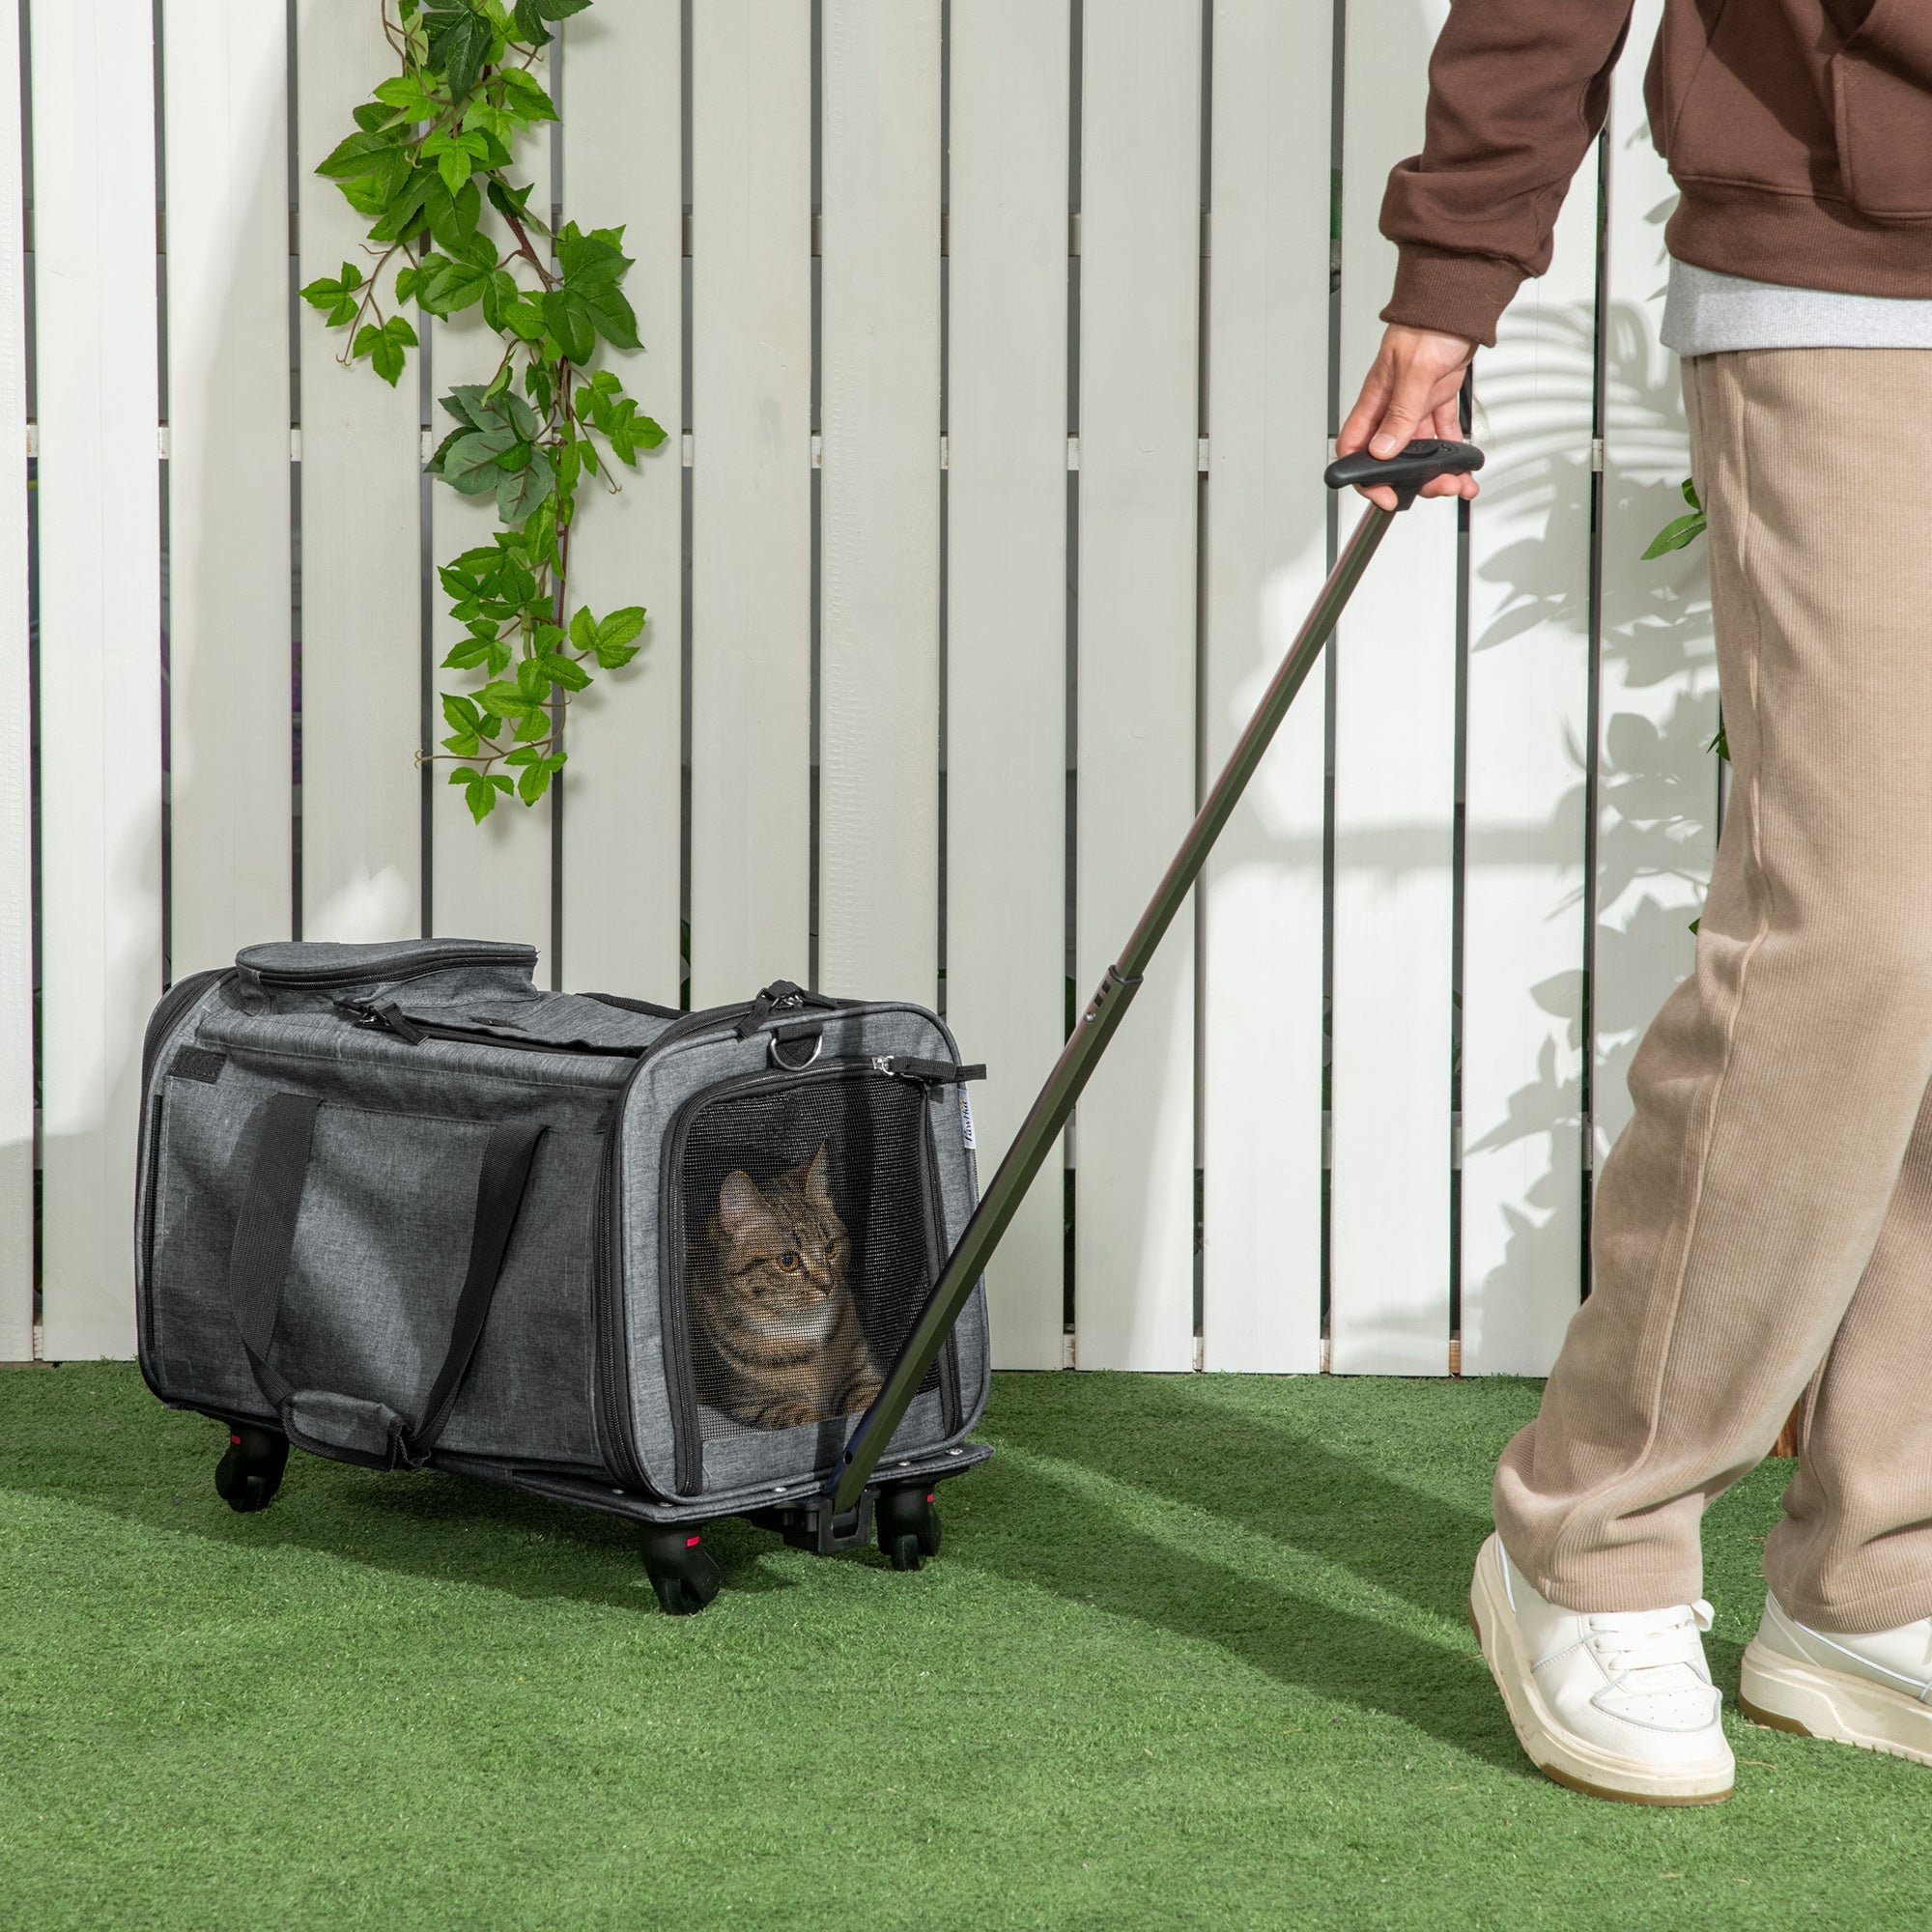 4 in 1 Pet Carrier Portable Cat Carrier Foldable Dog Bag On Wheels for Cats, Miniature Dogs w/ Telescopic Handle, Grey-1